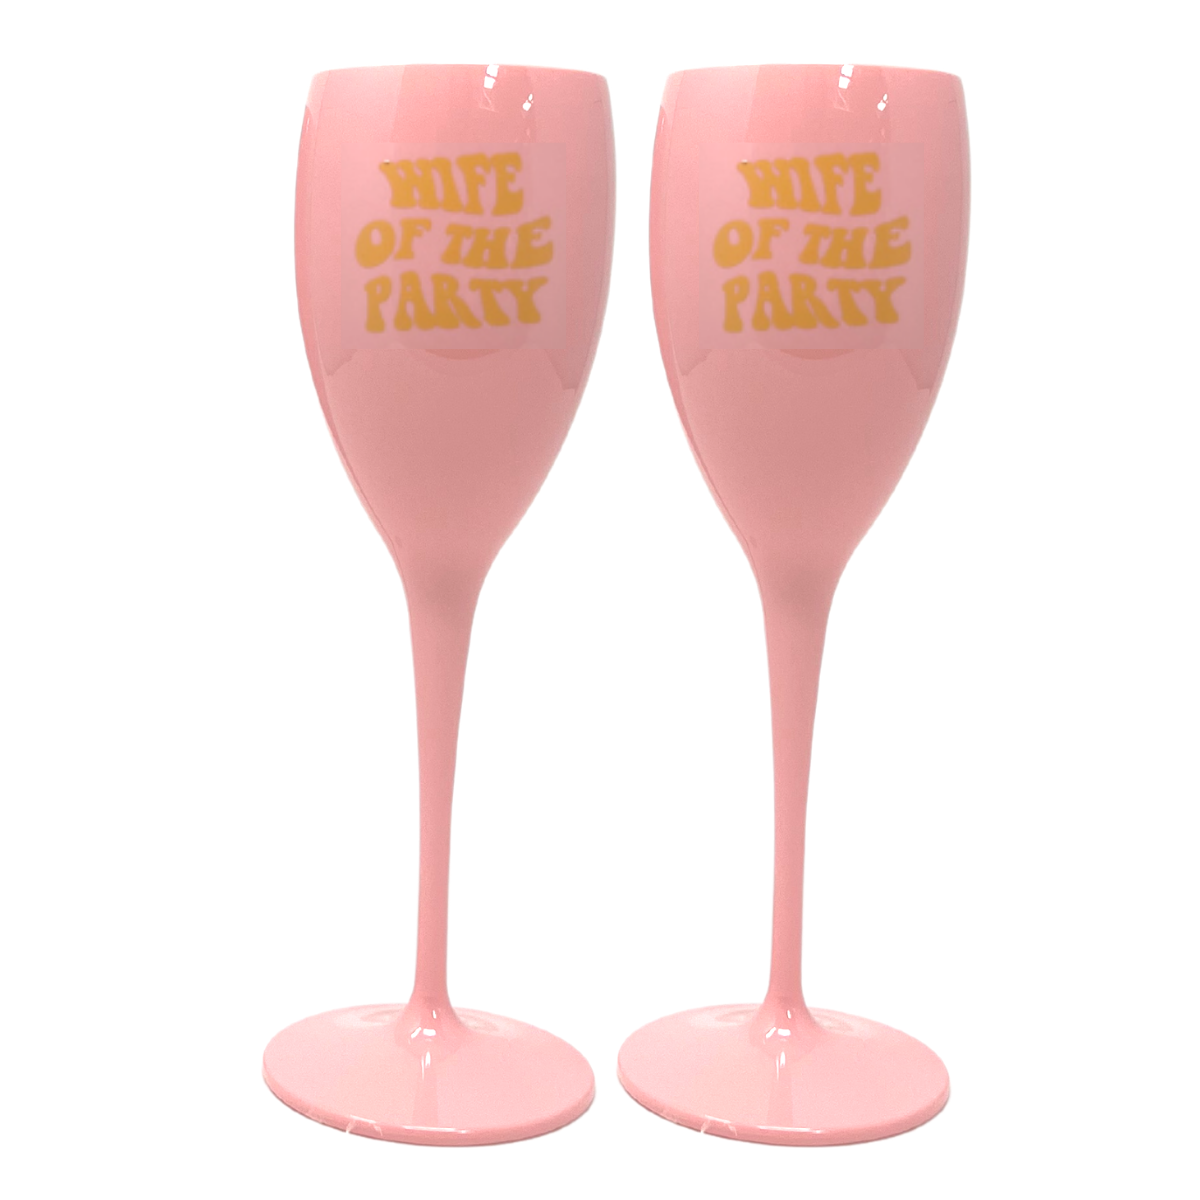 Wife Of The Party Champagne Flute